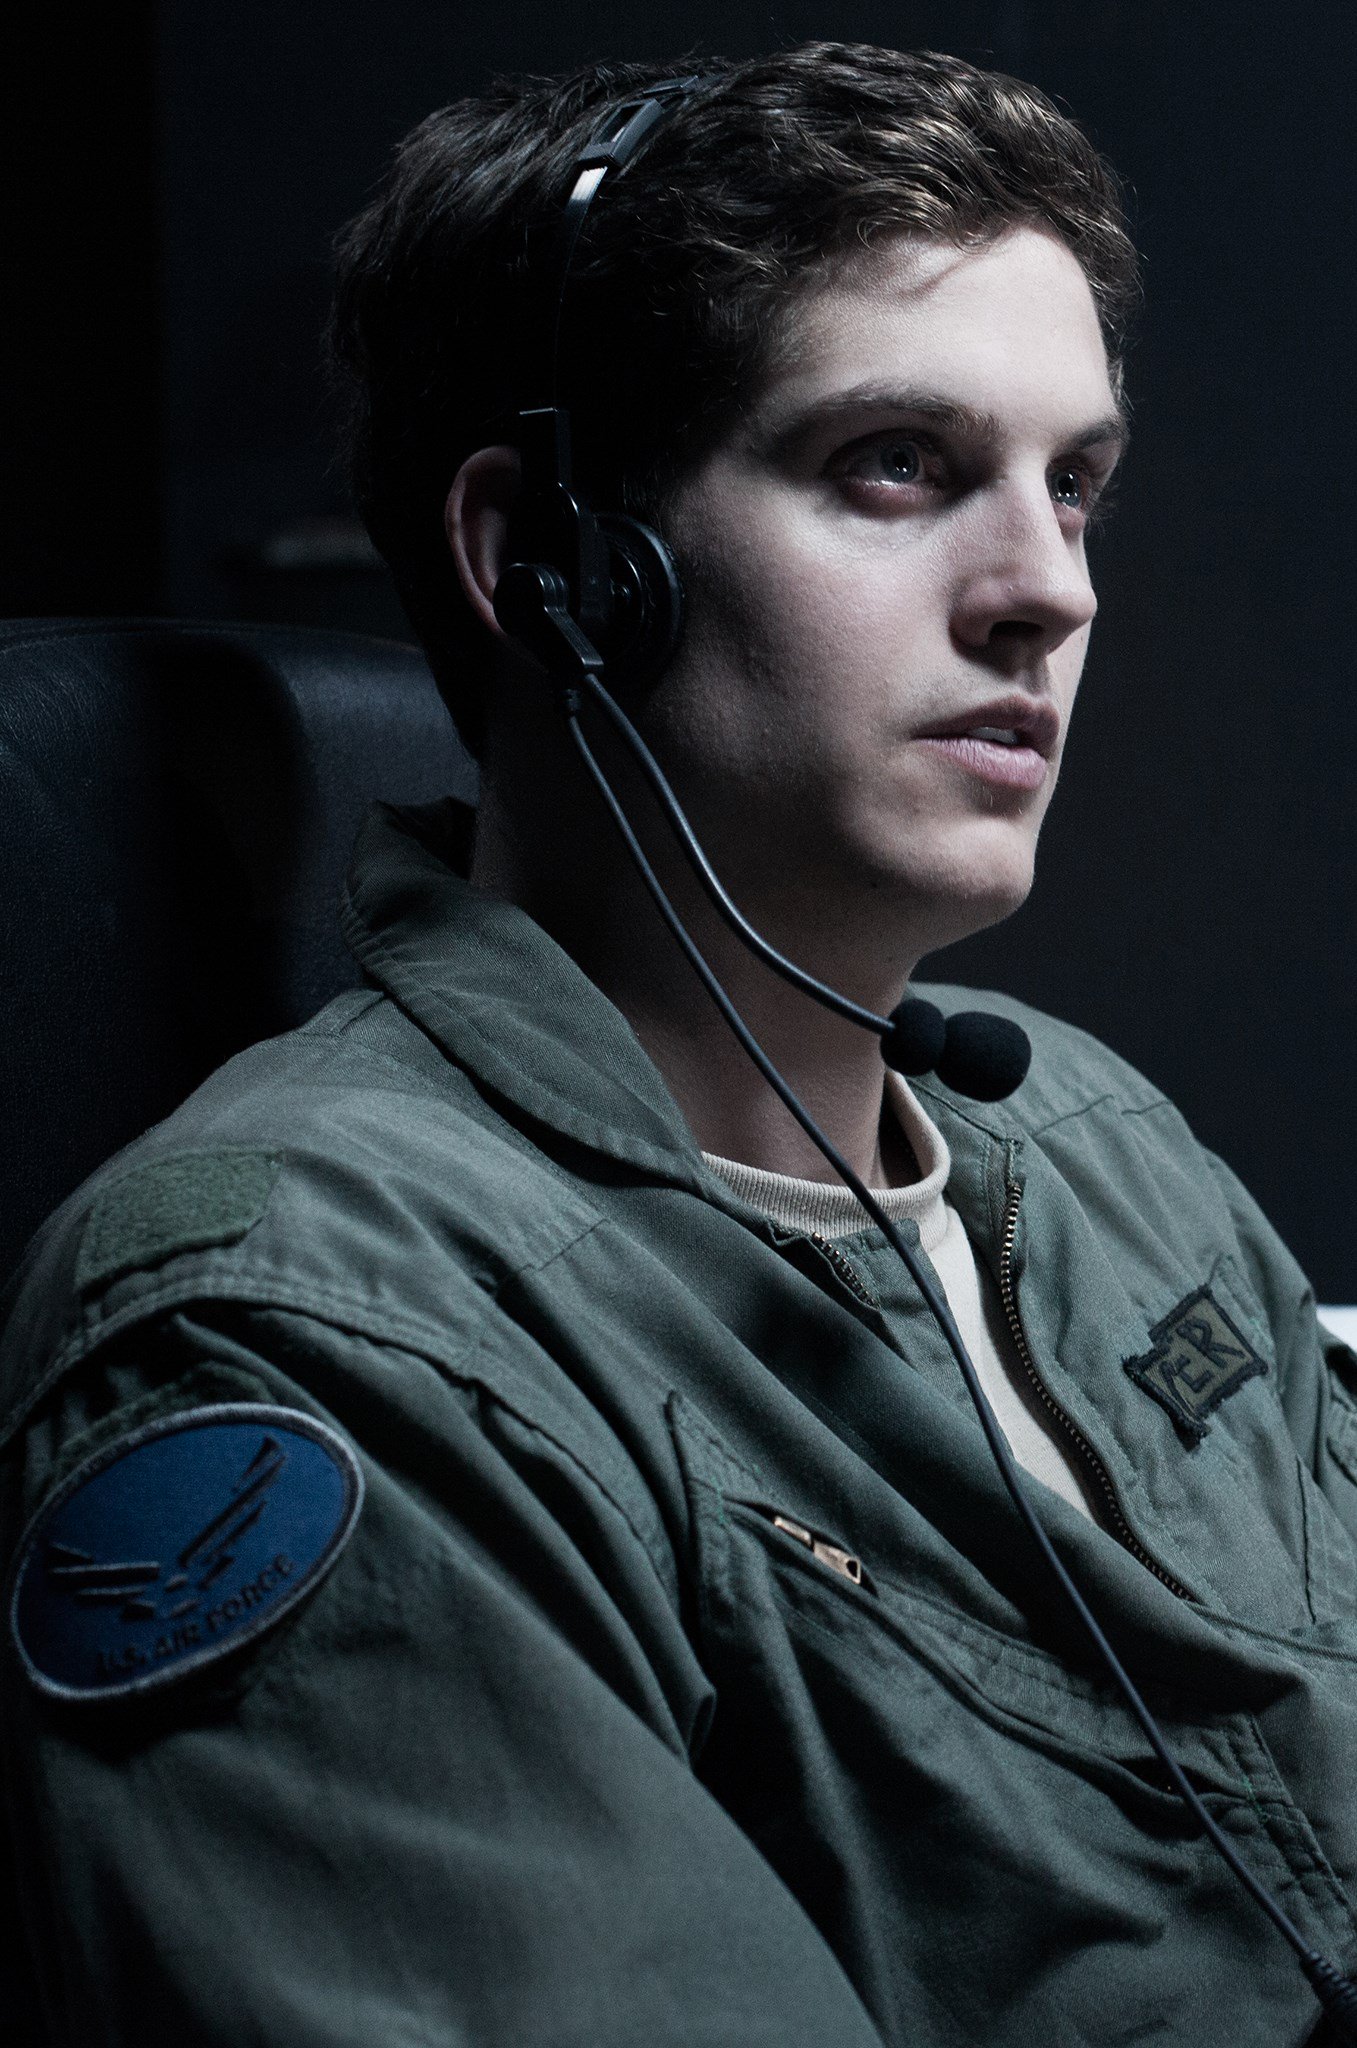 Daniel Sharman News on Twitter: "📷 Daniel Sharman is Matt in the short film "Drone," a rookie Air Force drone pilot who himself increasingly attached to a target. The short